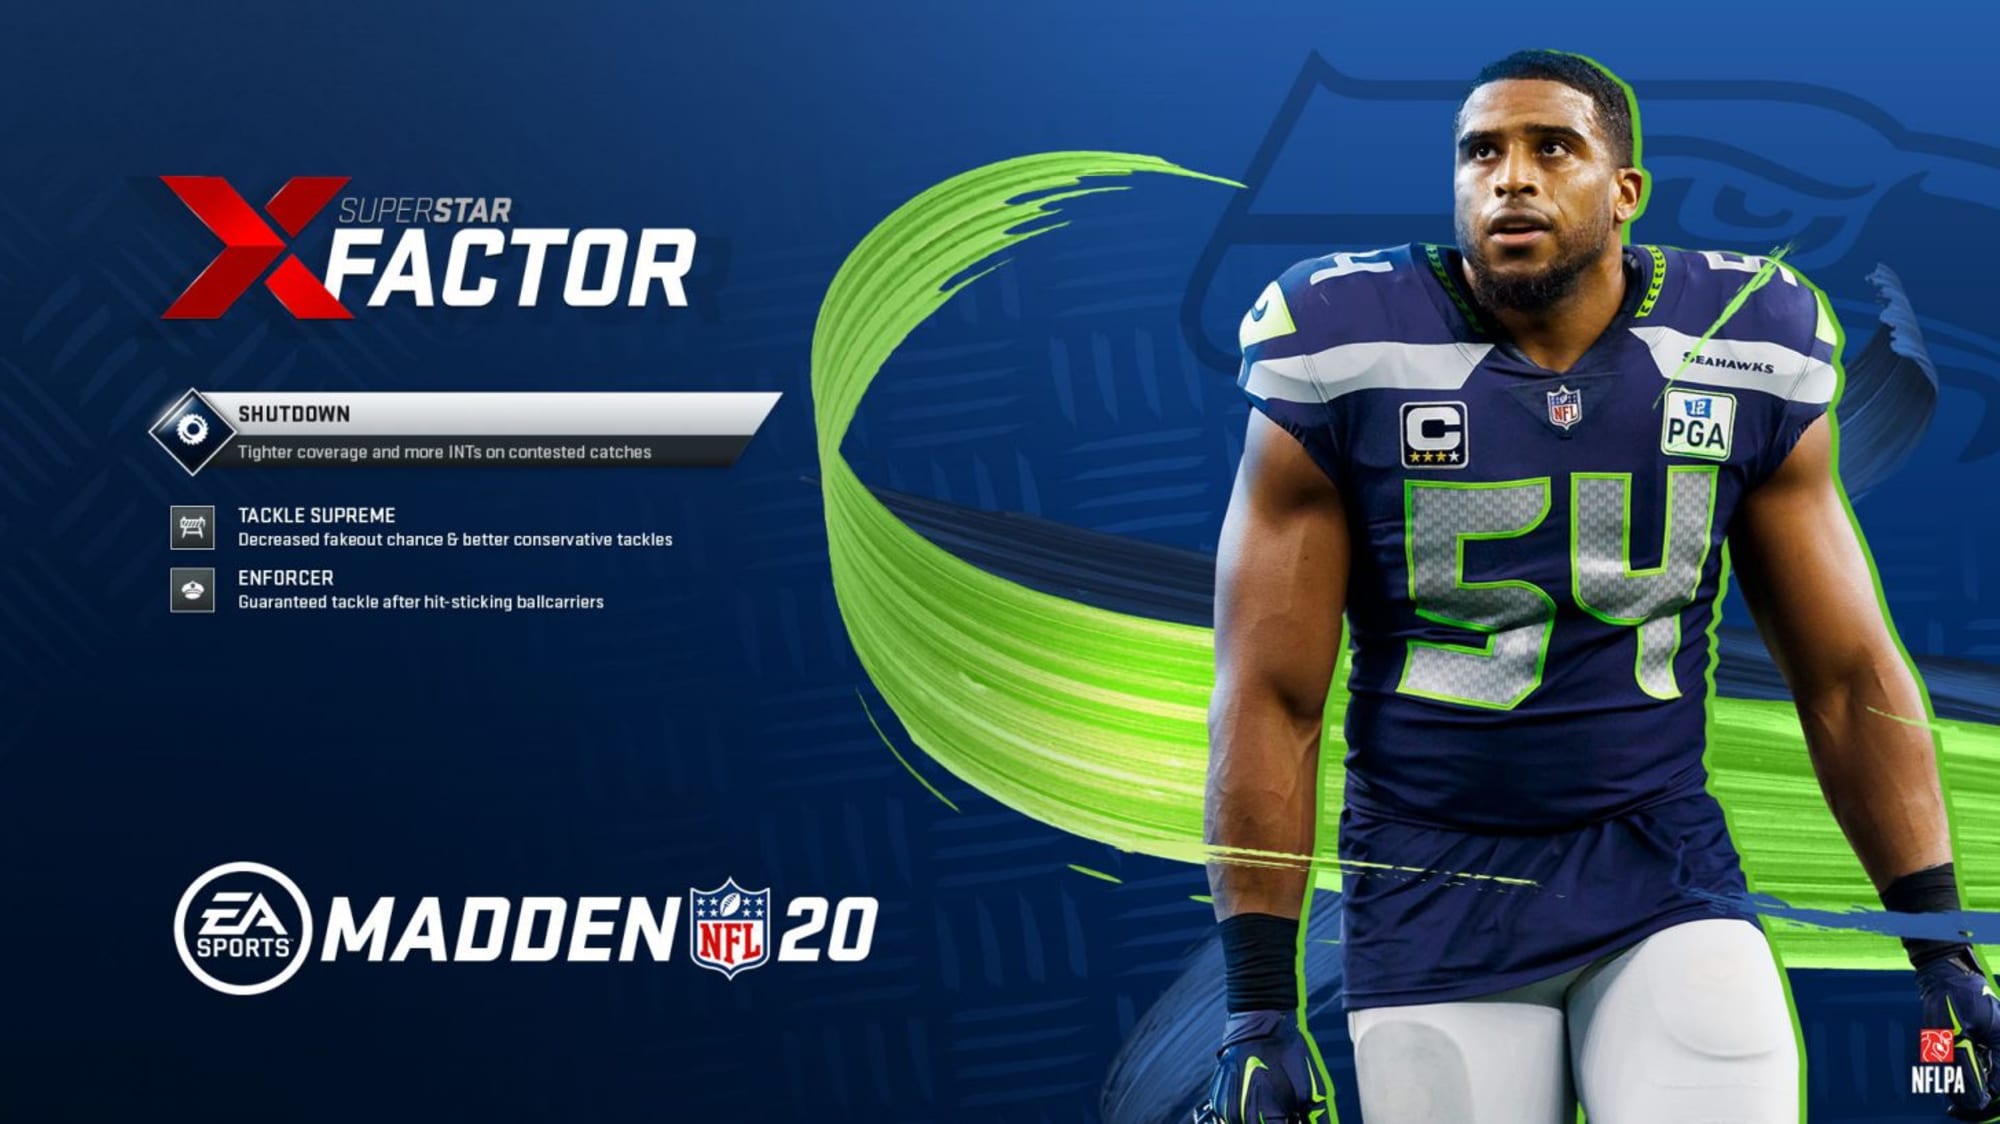 Madden NFL 20's second '99 Club' member is a pleasant surprise